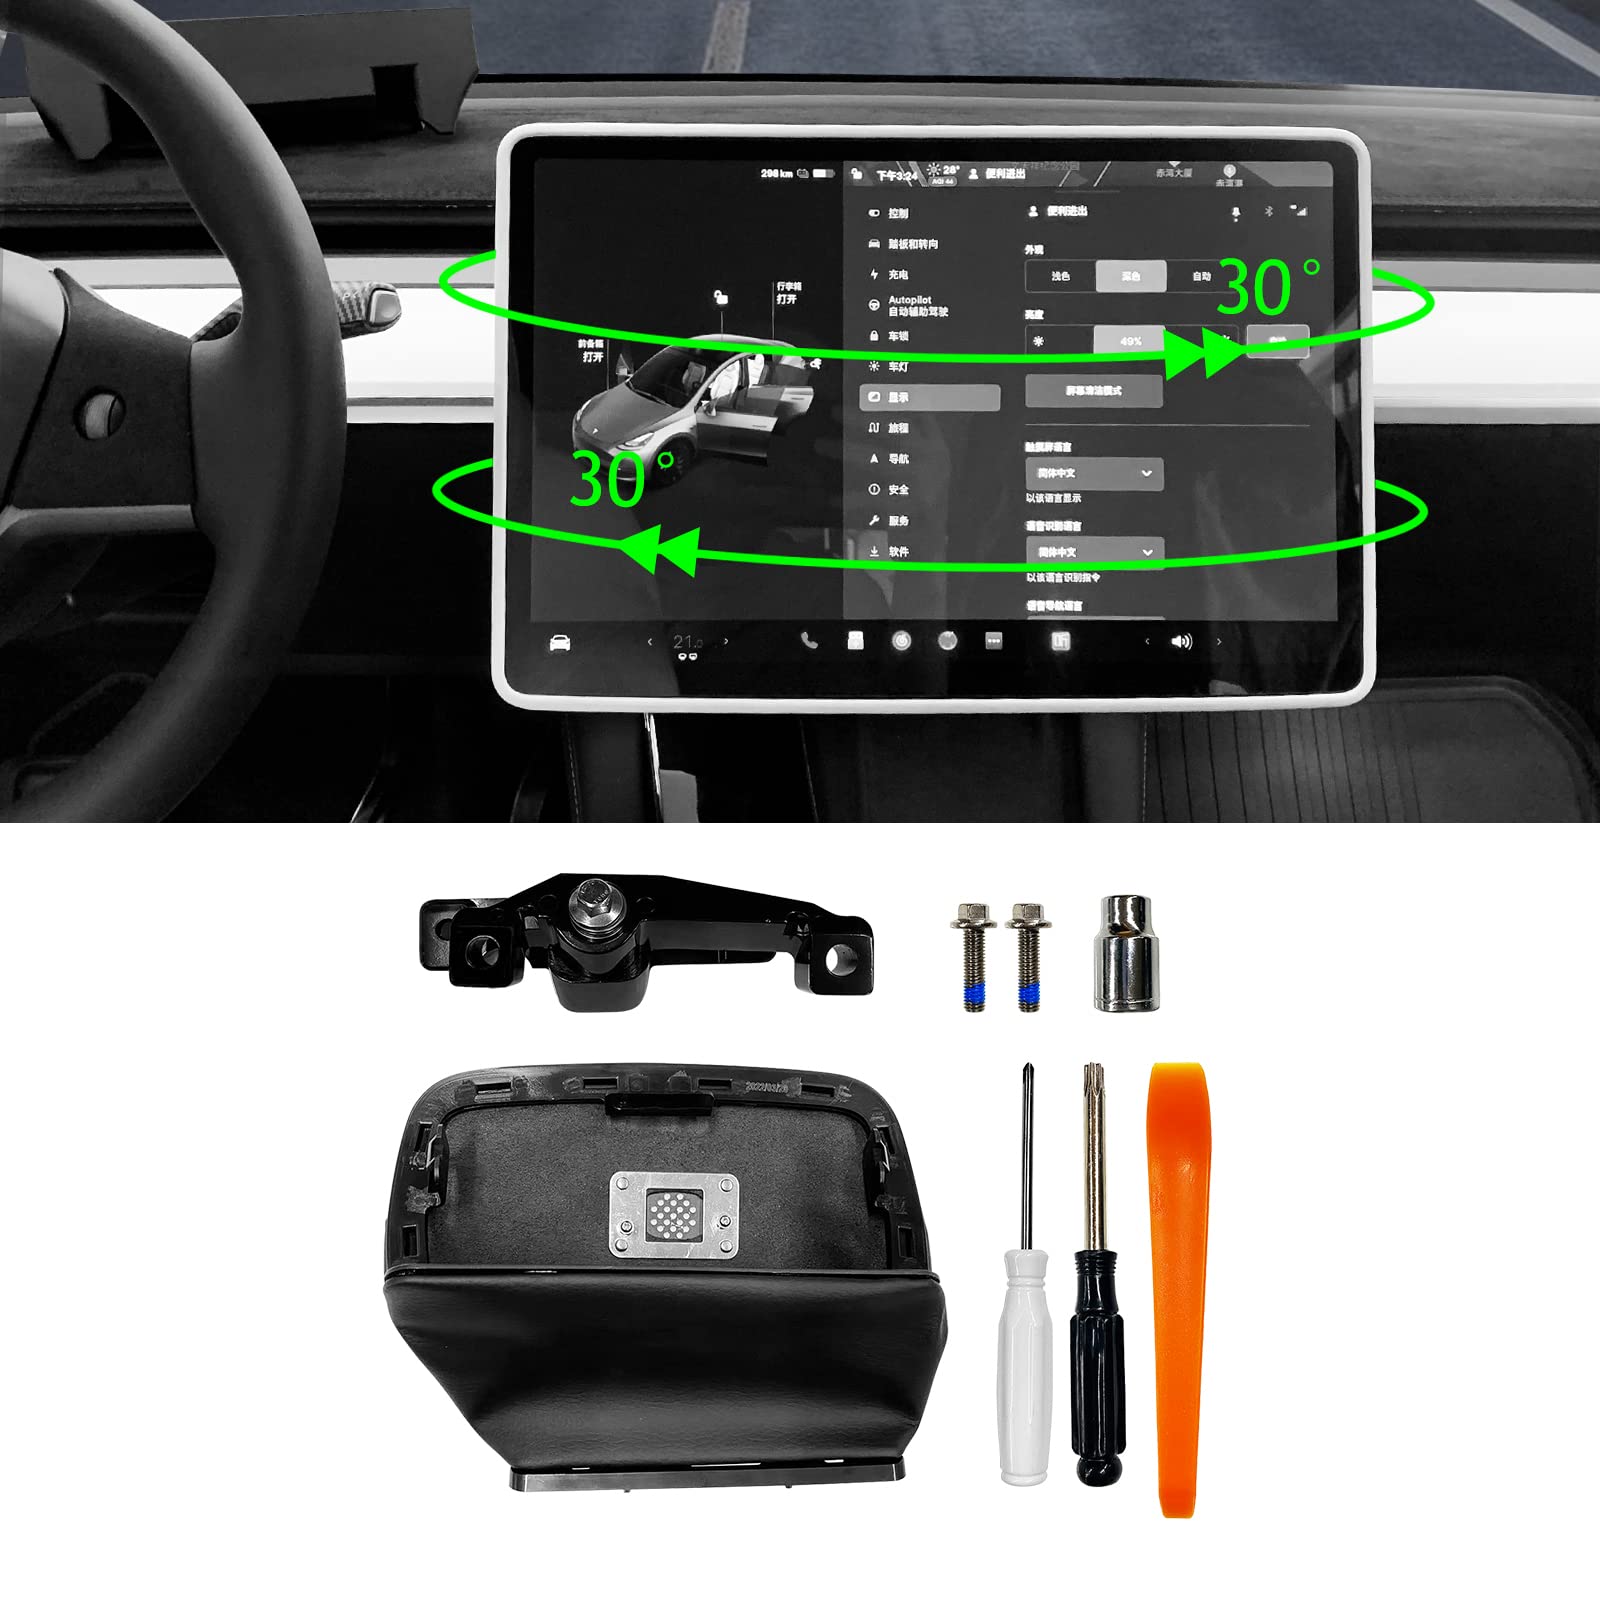 30 Degree Center Console Screen Rotation Bracket, GPS Navigation Bracket, Car Center Control Navigation Screen Bracket Compatible with Tesla Model 3 Model Y (Before January 2021)